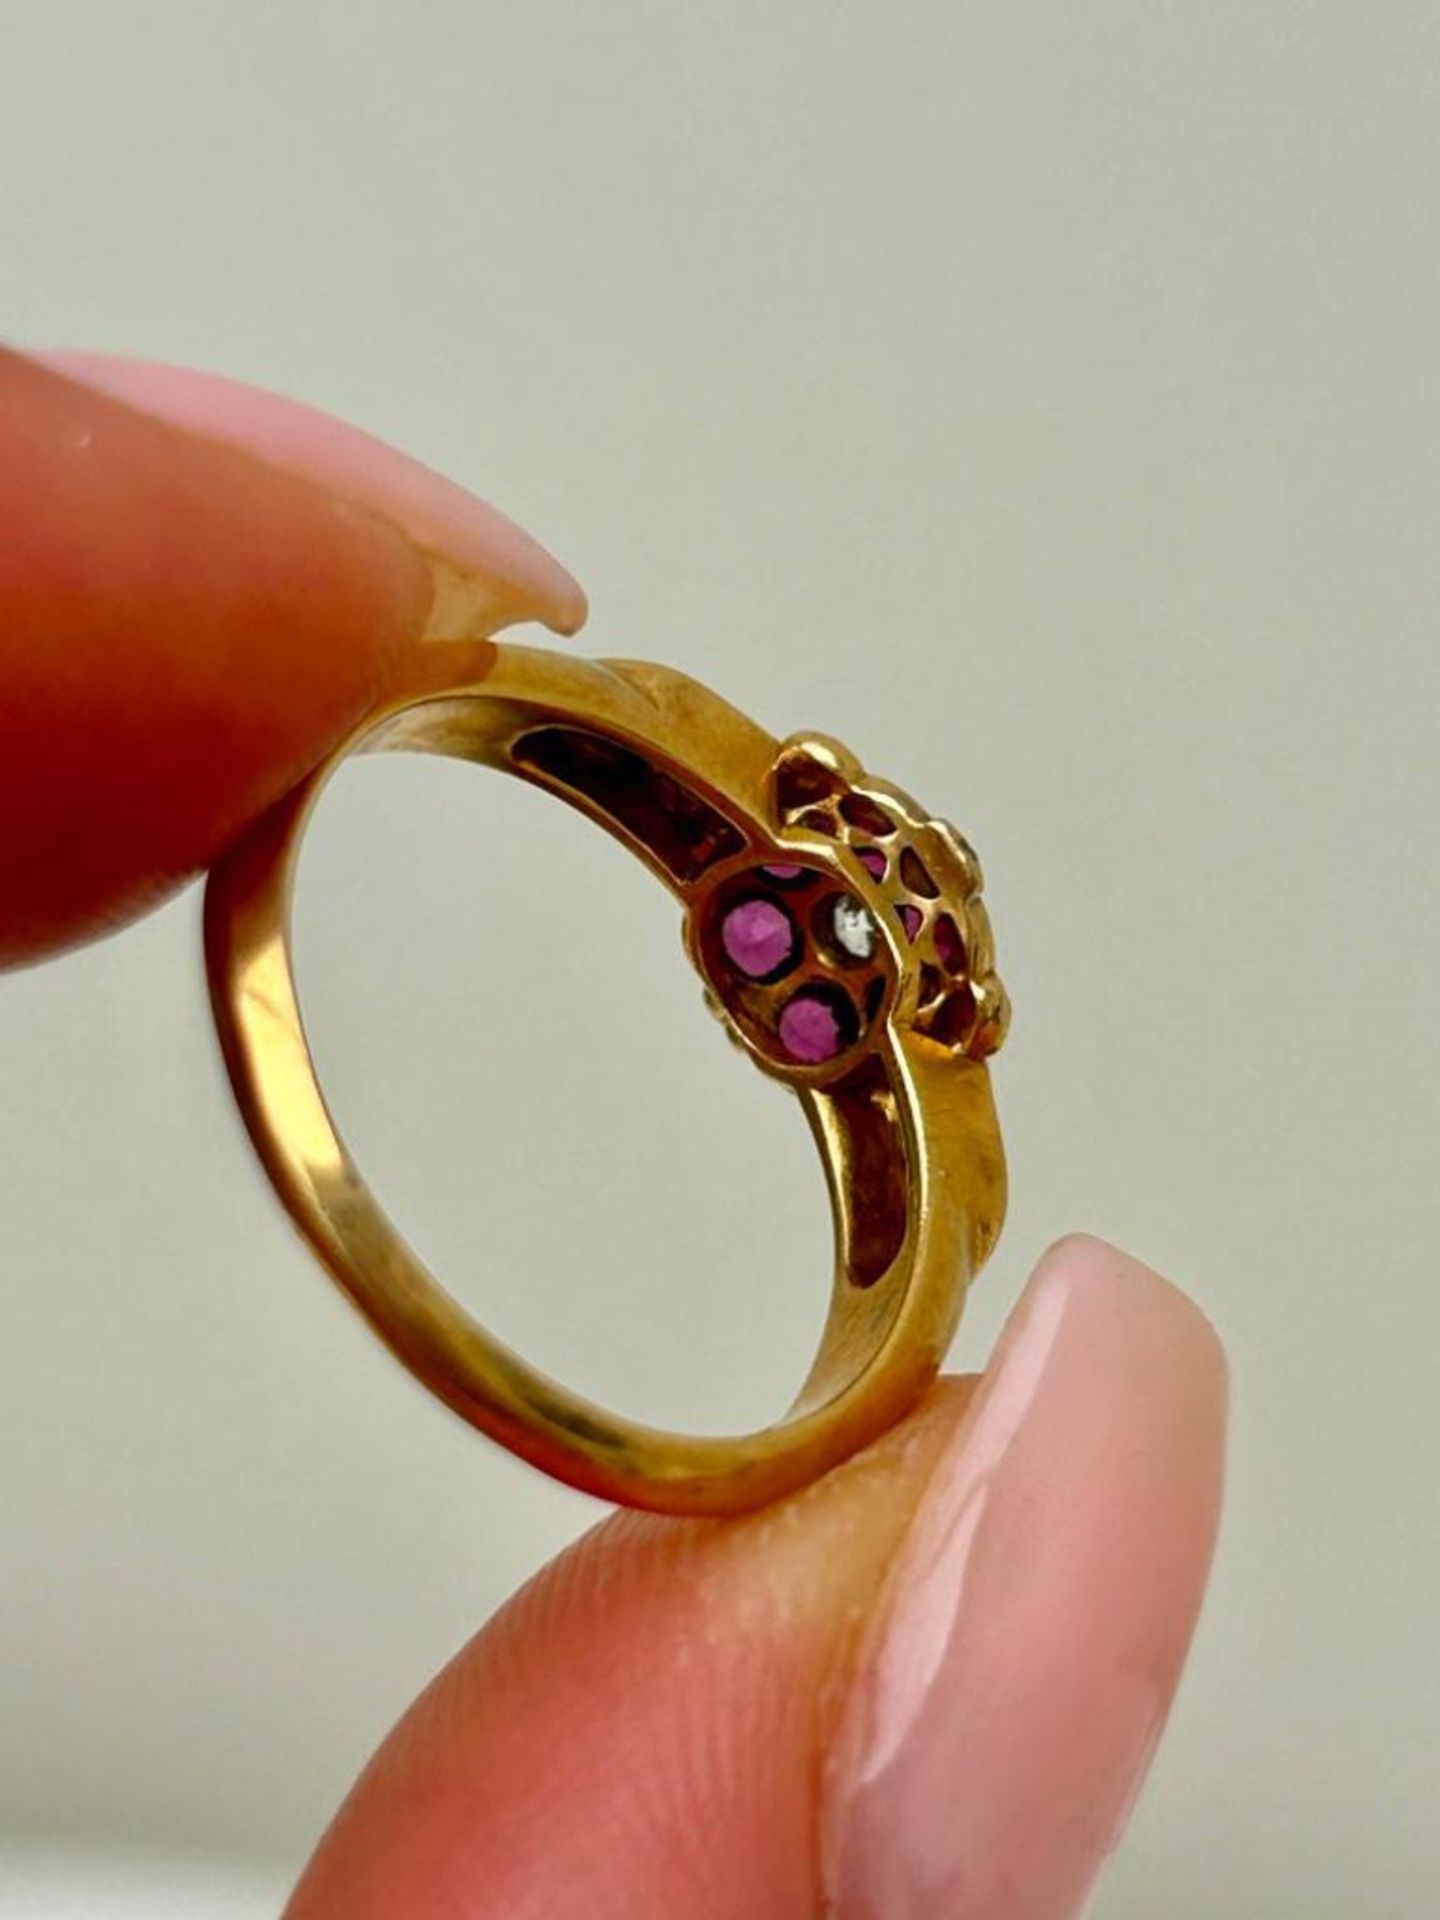 Wonderful Antique 18ct Yellow Gold Ruby and Diamond Ring - Image 6 of 6